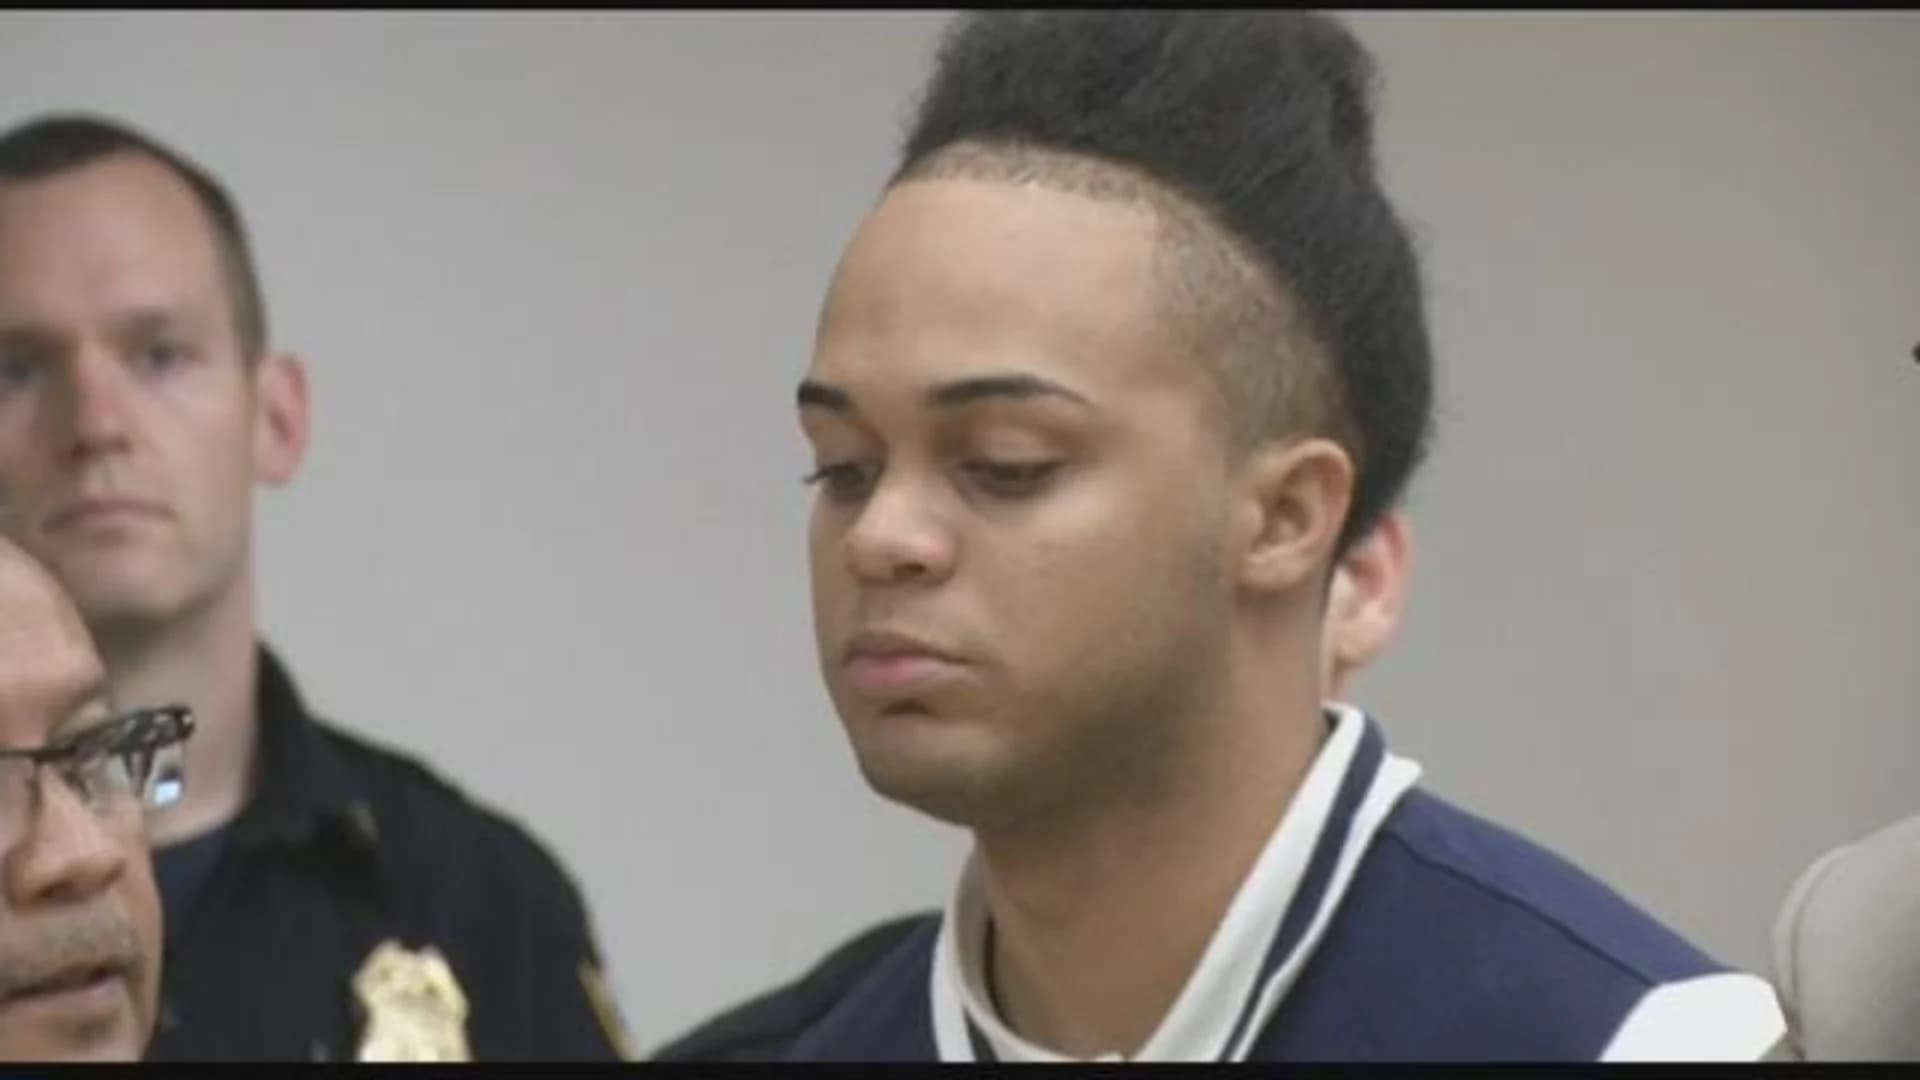 11th suspect in teen’s bodega slaying turns himself in at 48th Precinct